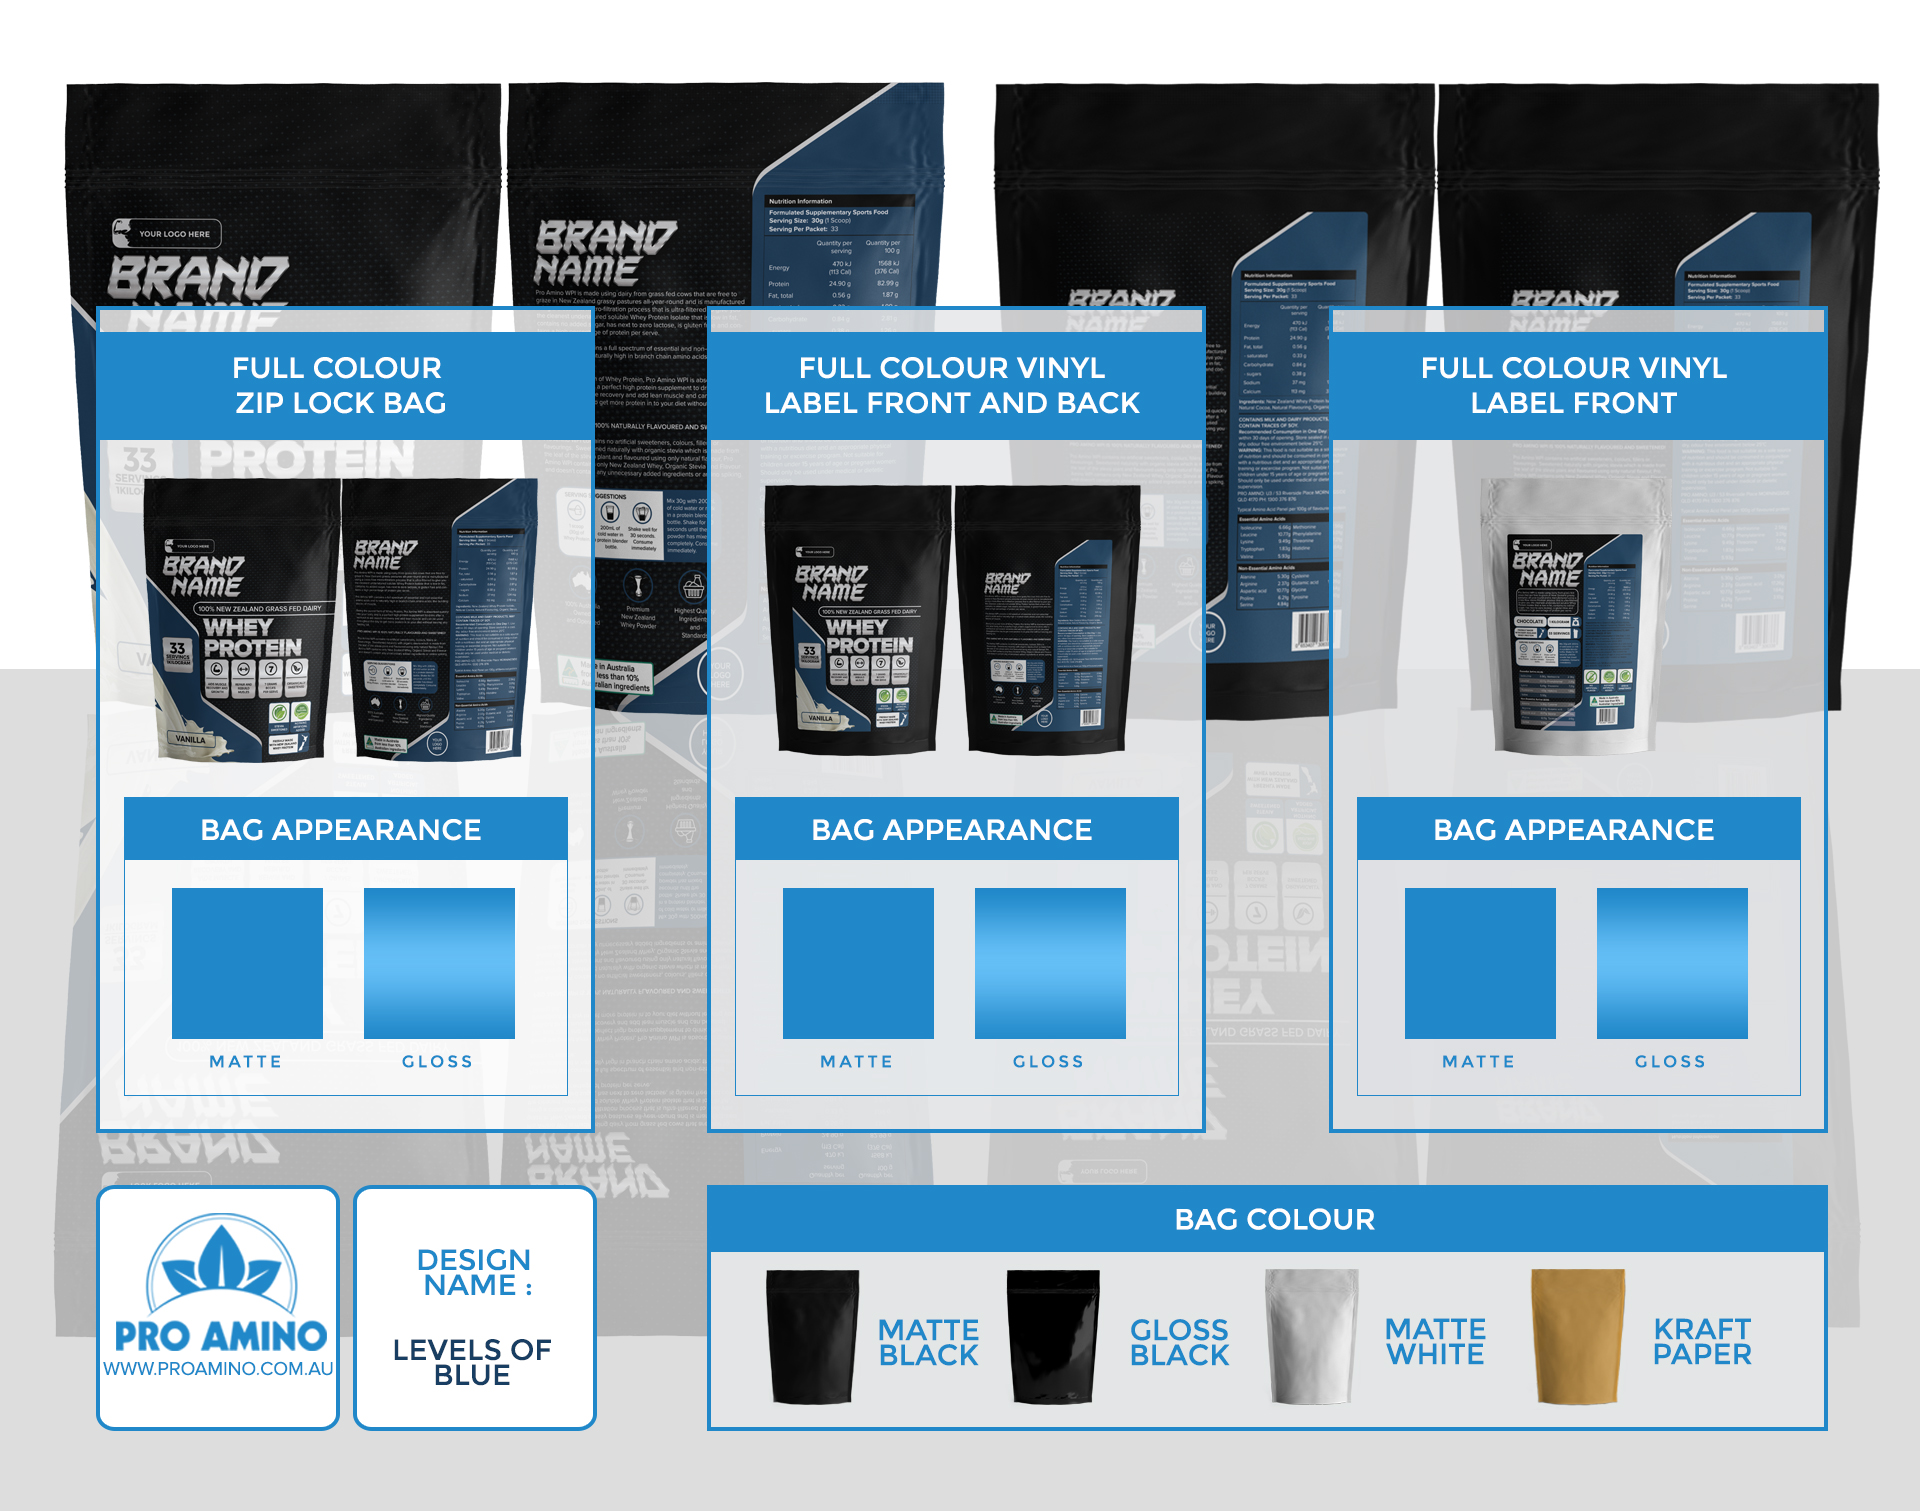 Levels of Blue Protein Powder Packaging Design Template